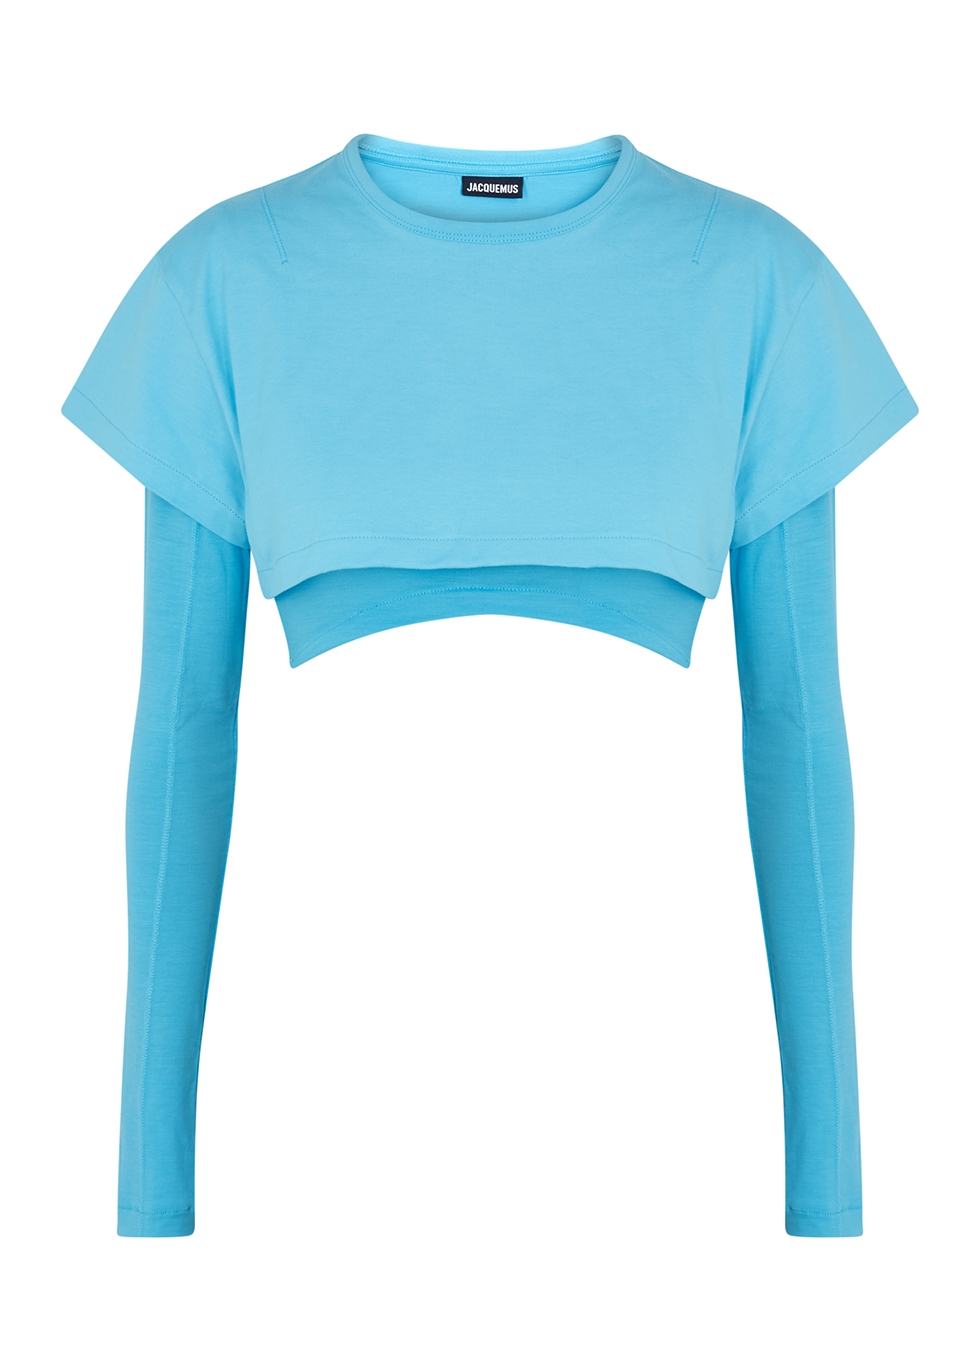 Le Double T-shirt turquoise layered cotton top